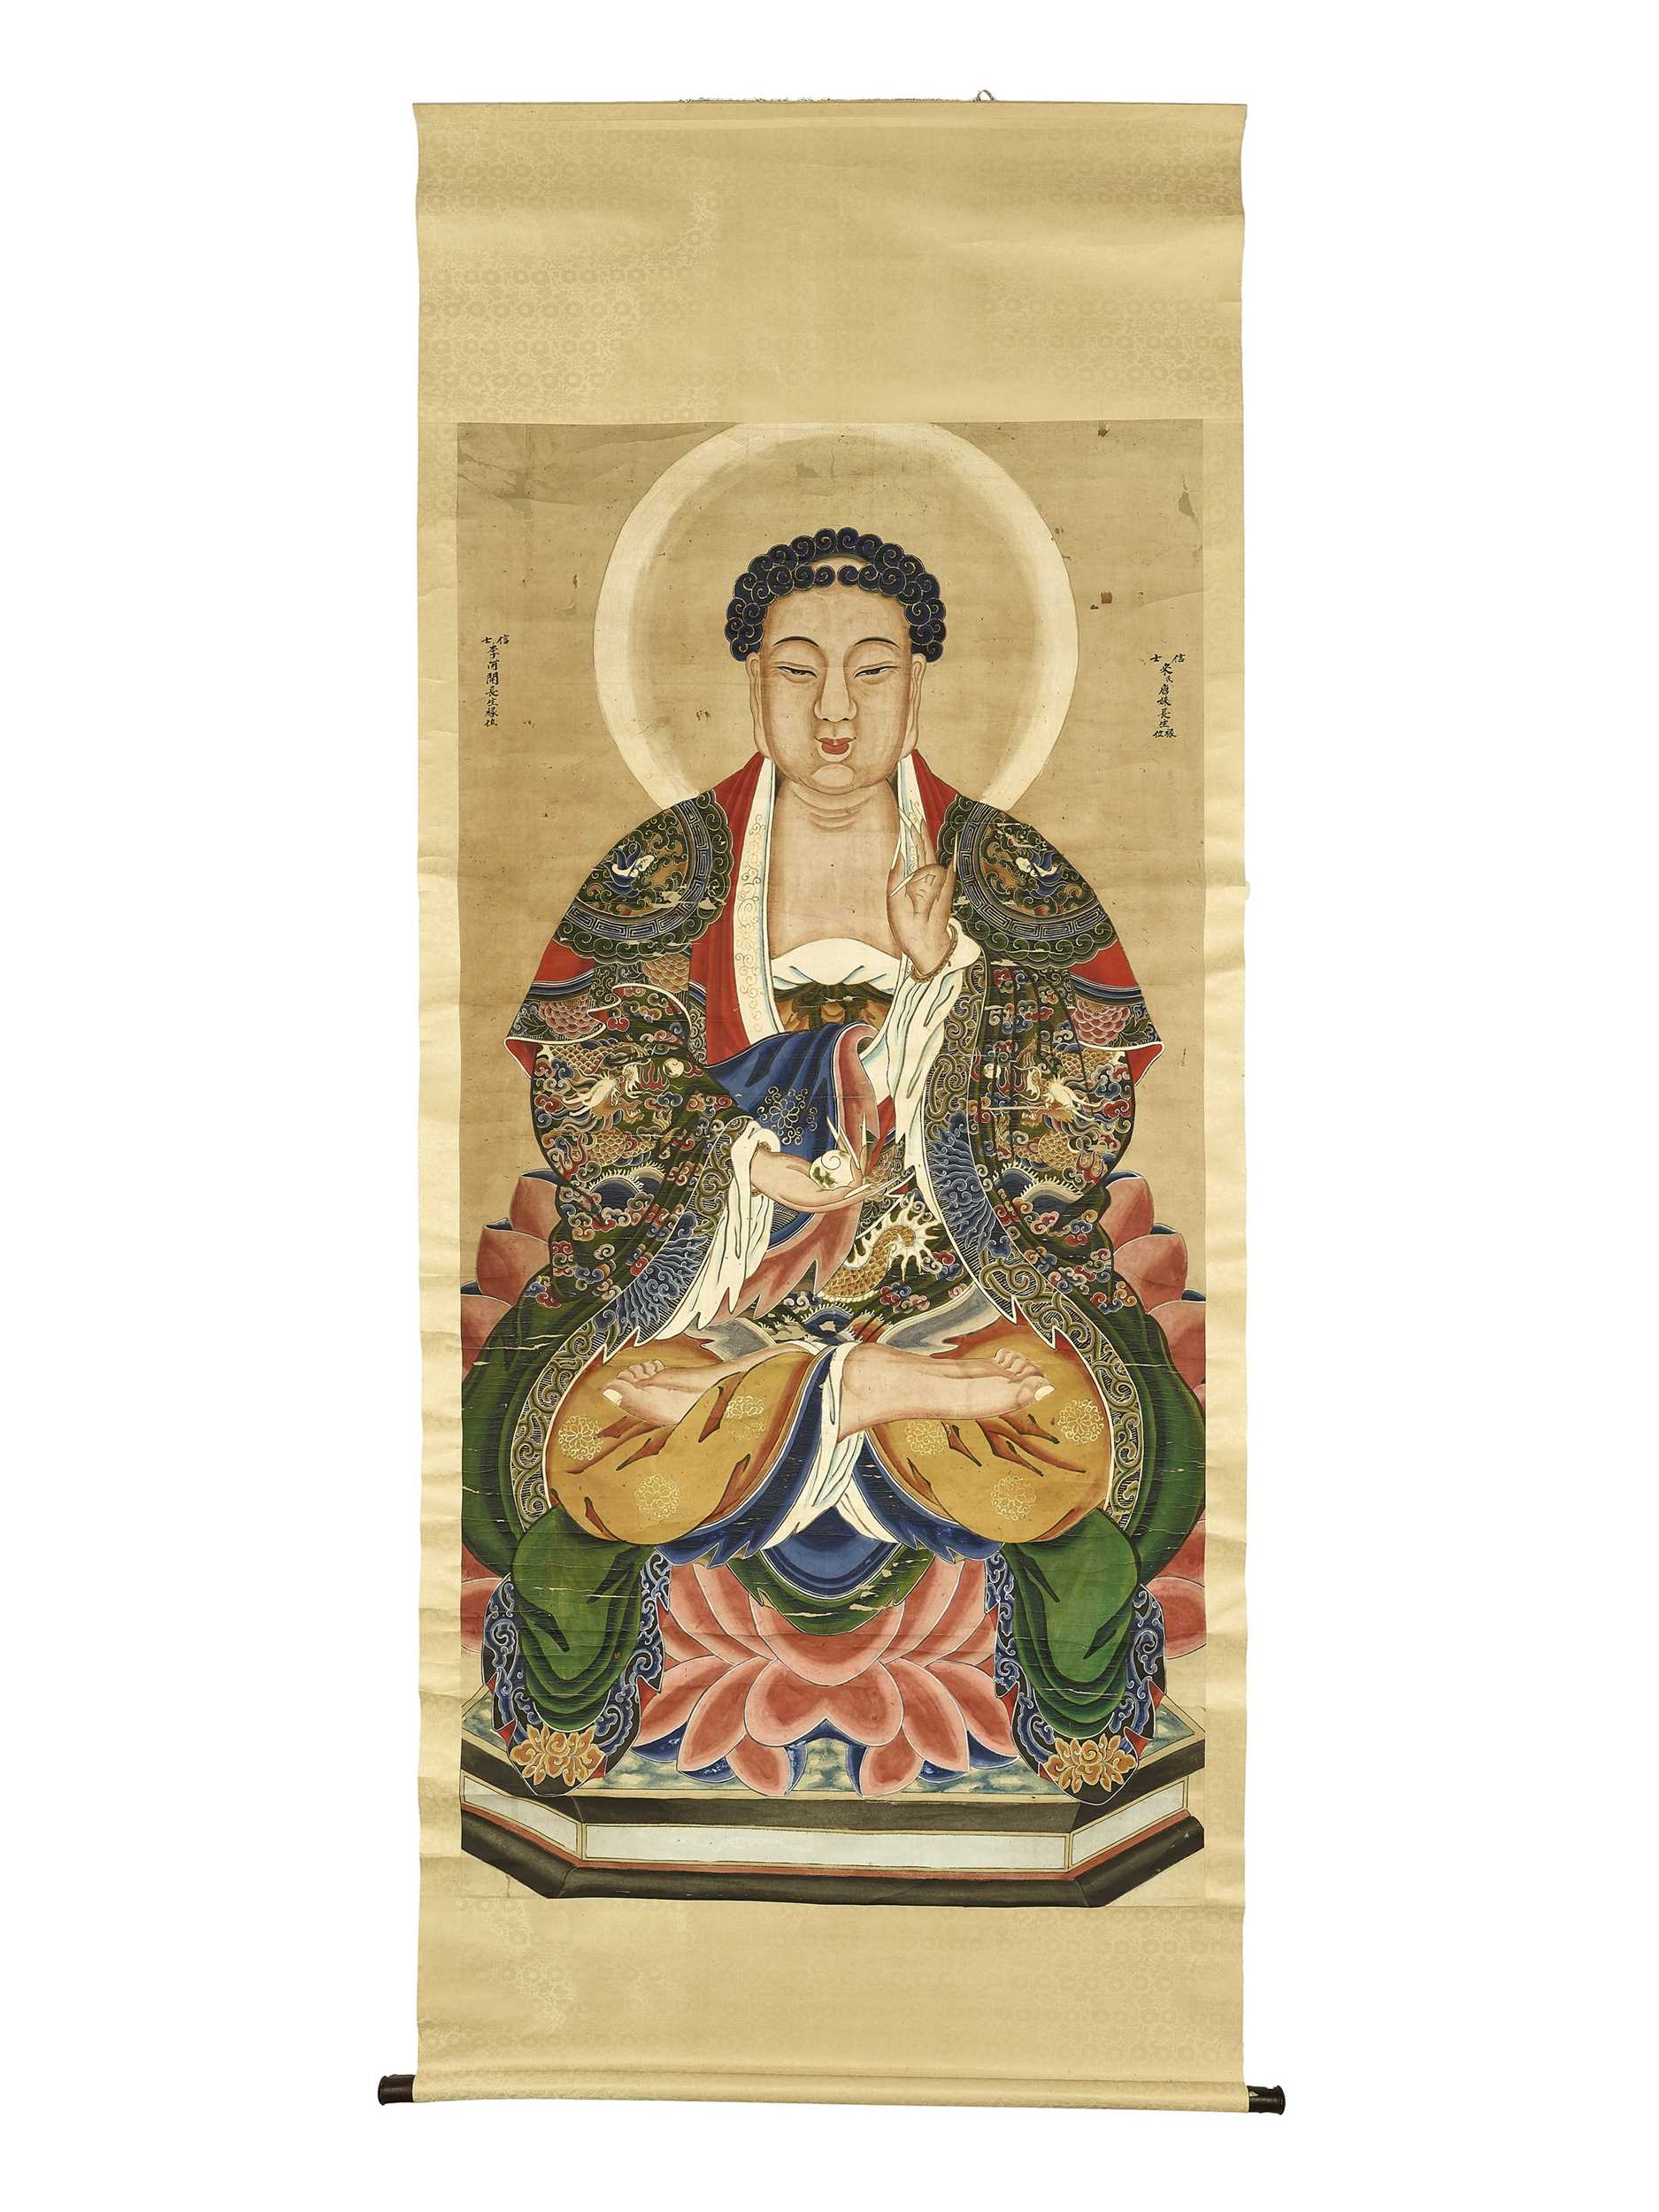 Lot 464 - A PAINTING OF BUDDHA, QING